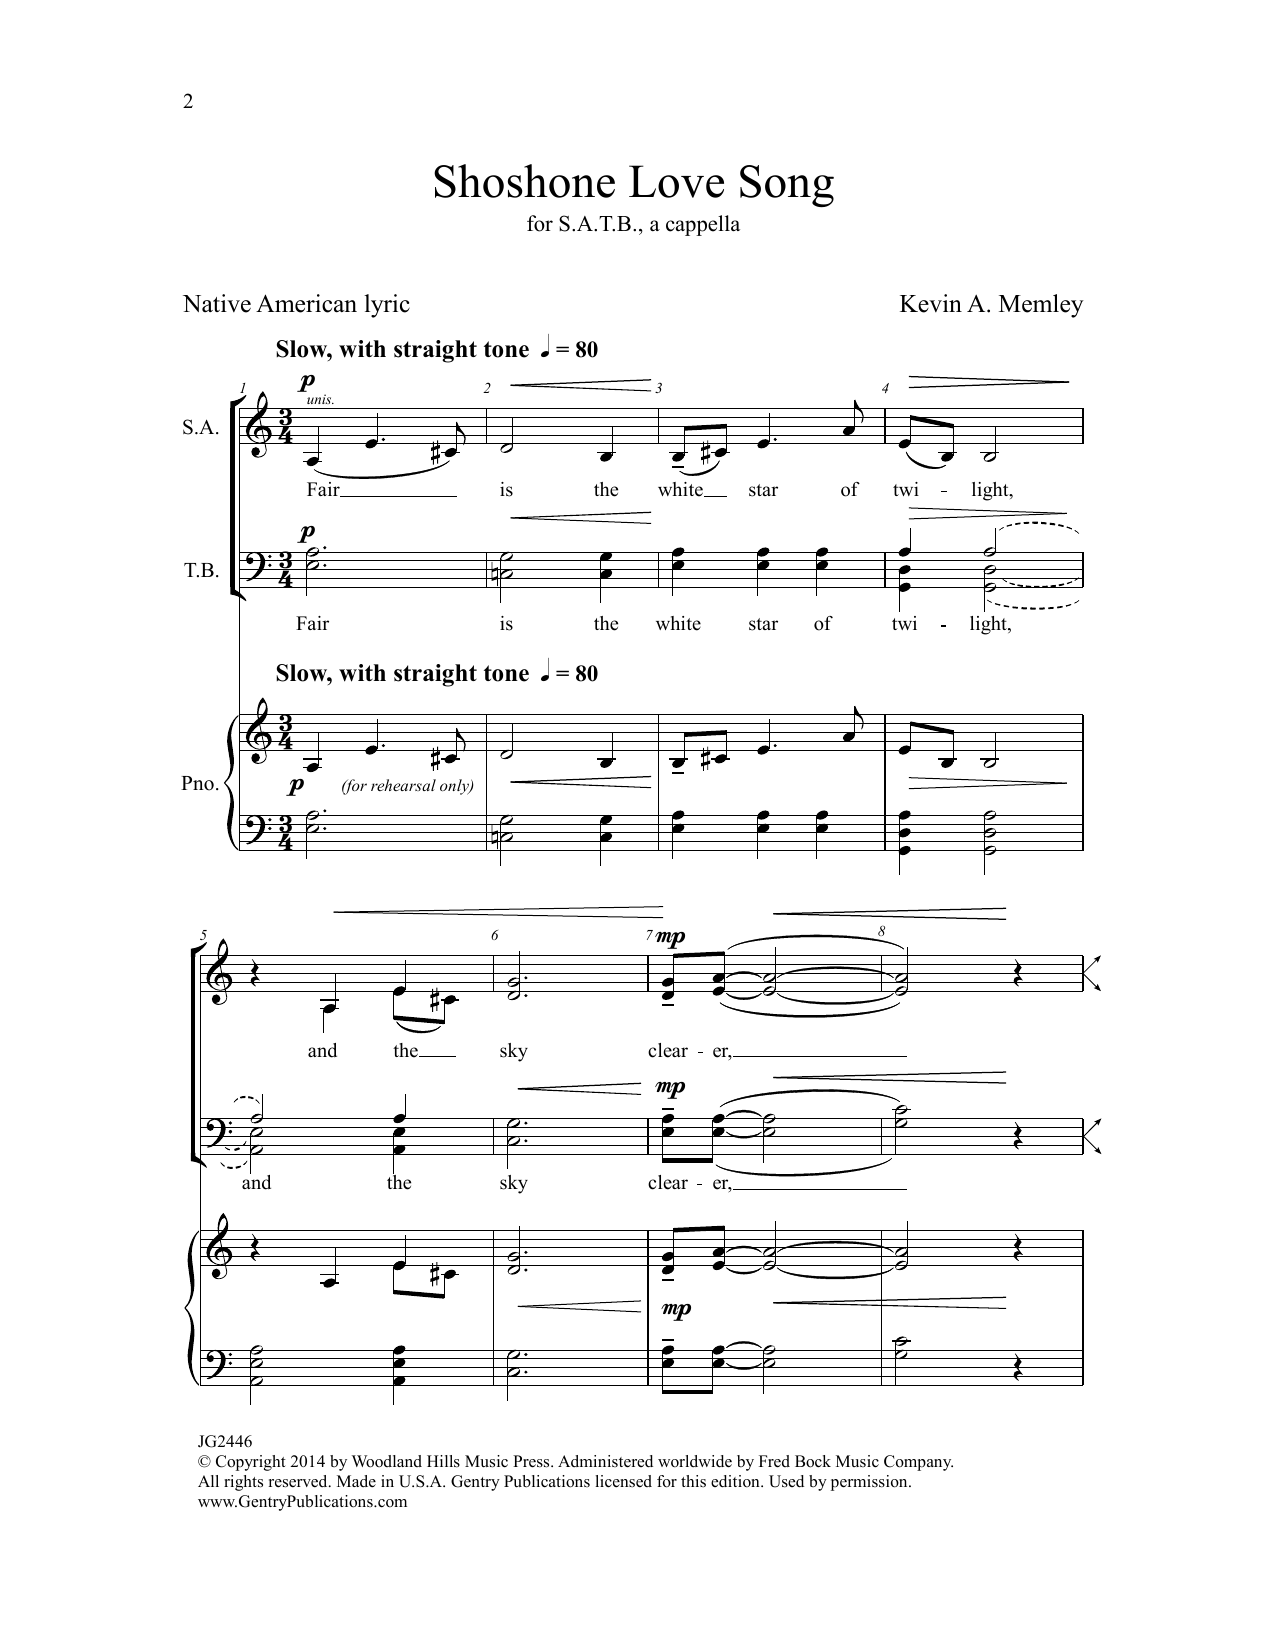 Download Kevin A. Memley Shoshone Love Song Sheet Music